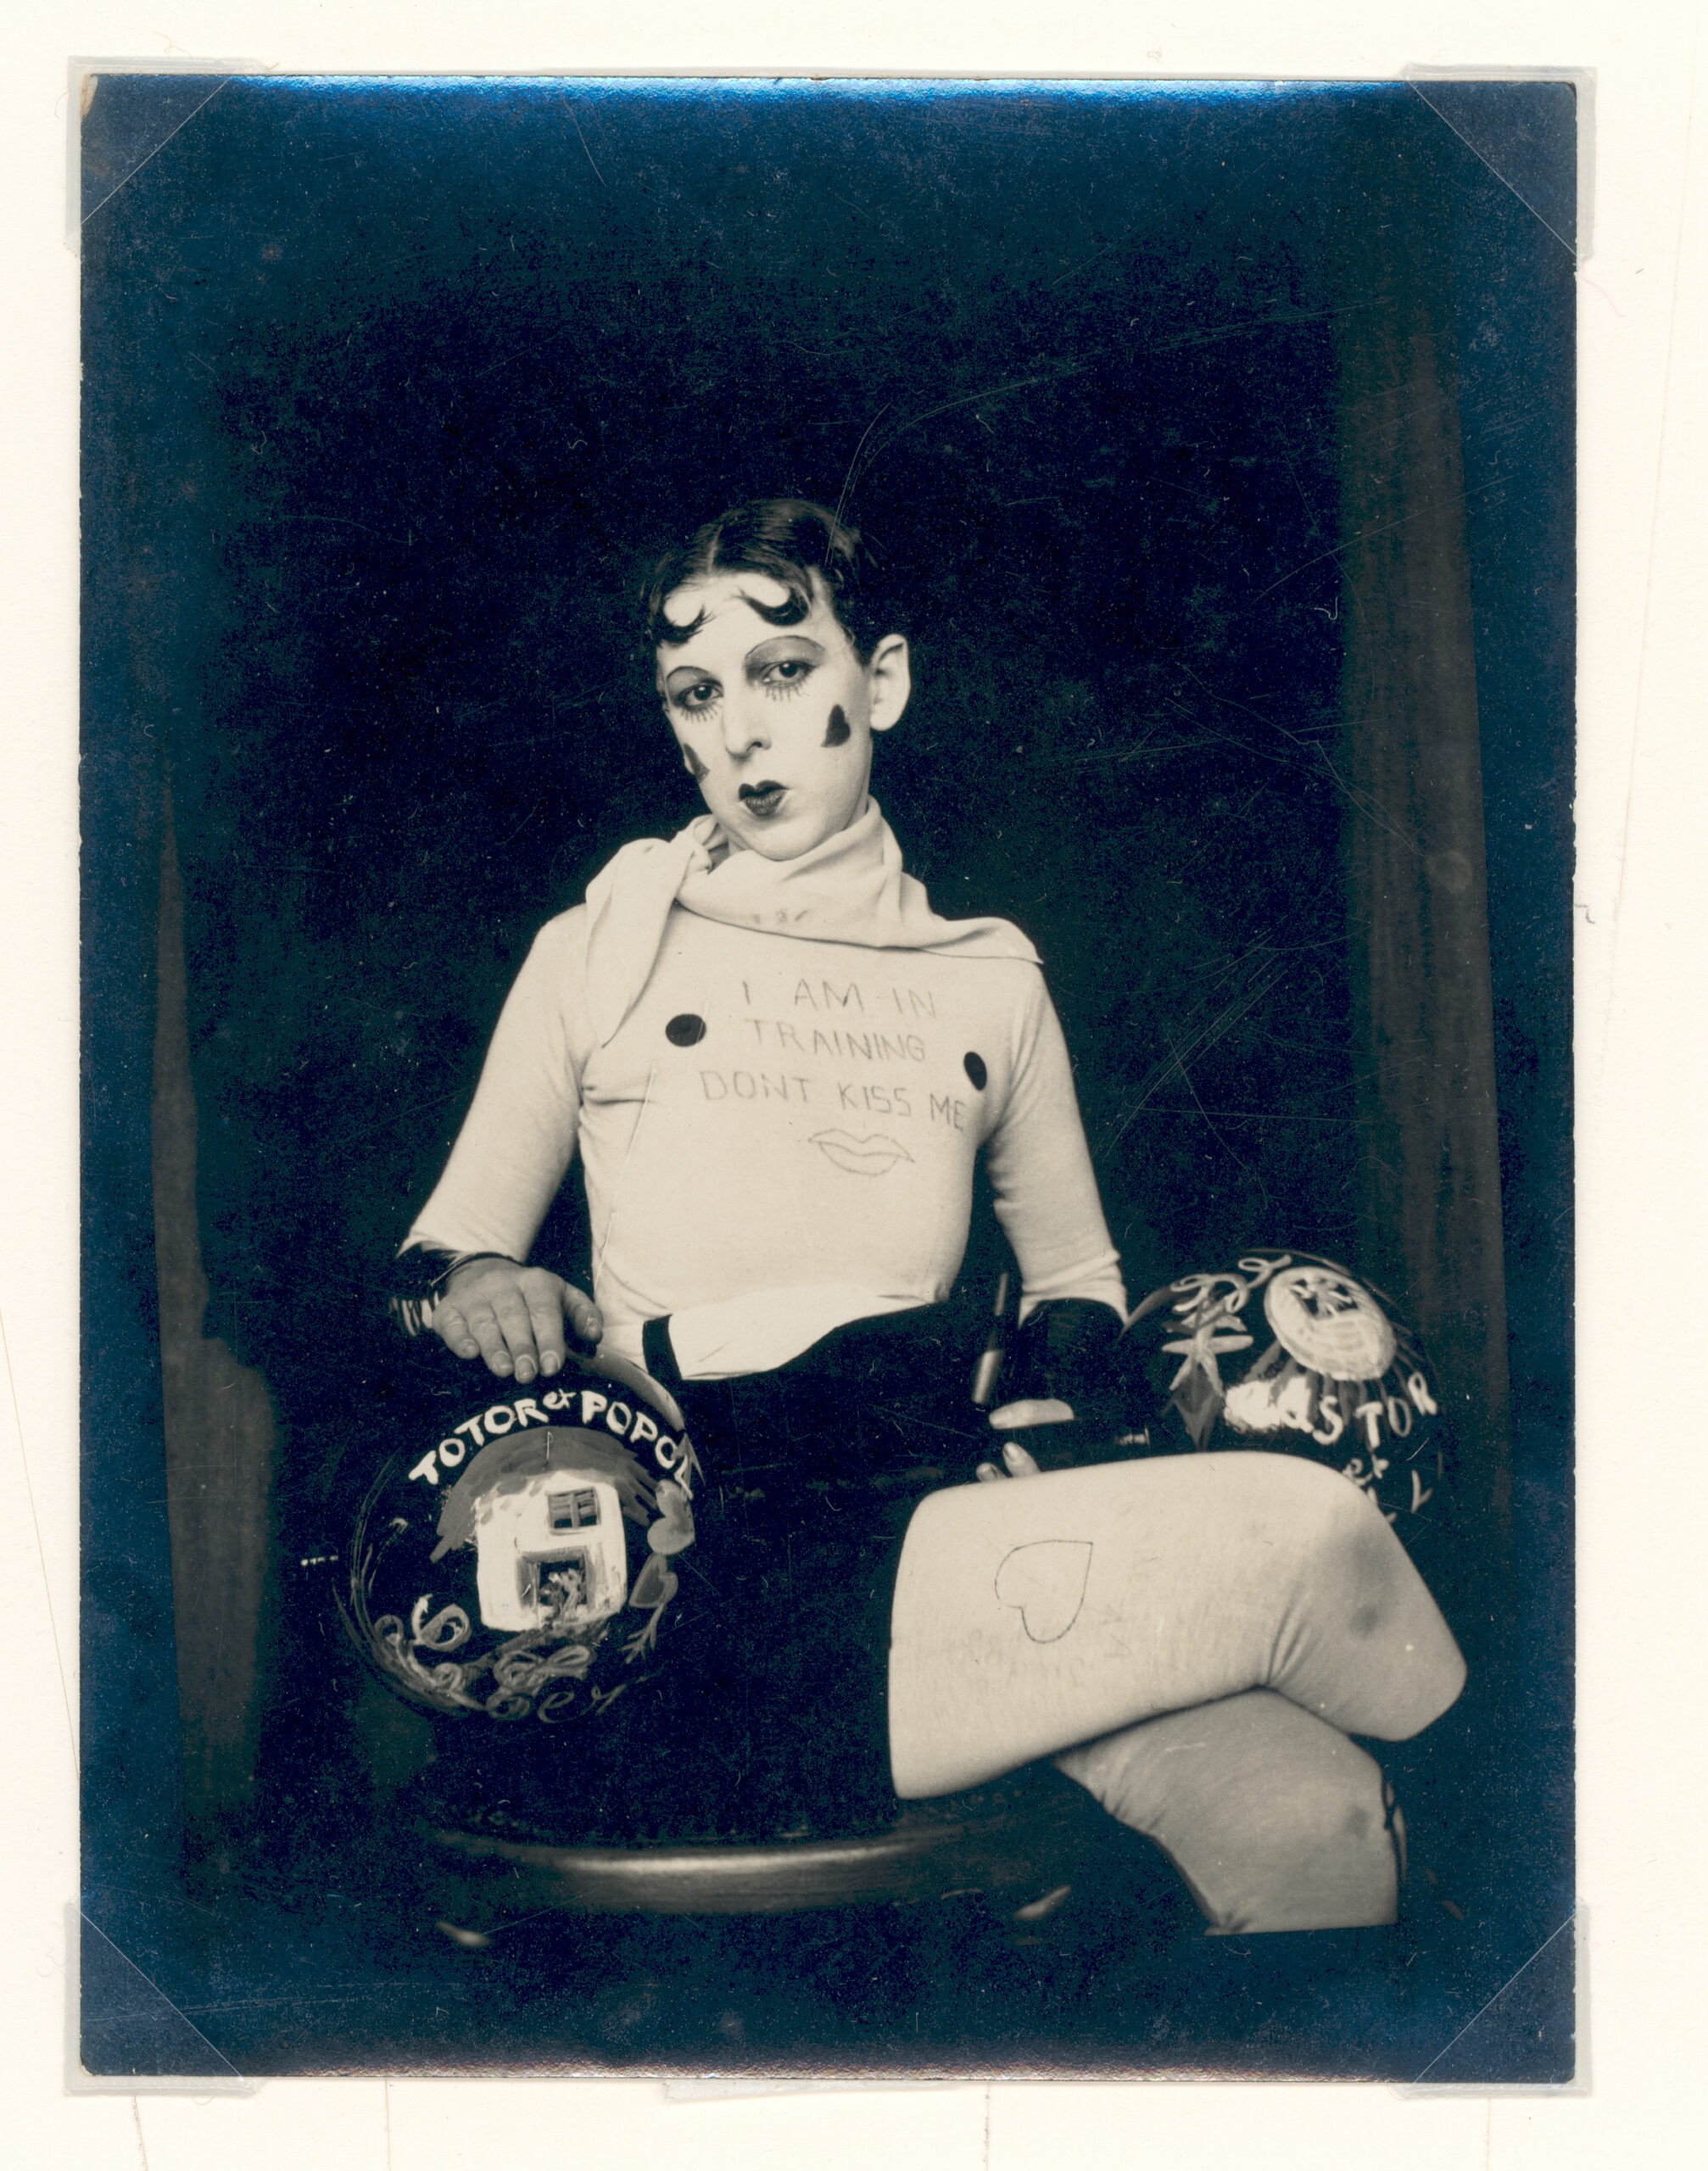 A photo of Claude Cahun. Her hair and make-up is in the typical style of 1920s flapper women. Her cheeks are adorned with hearts, and her top has a message written on it beside circular nipples, proclaiming: ‘I am in training don’t kiss me.’ She has dumbbells resting on her lap so that the large balls of the weights sit on either side of her lap. This picture is presented as part of the exhibition Claude Cahun: Beneath This Mask